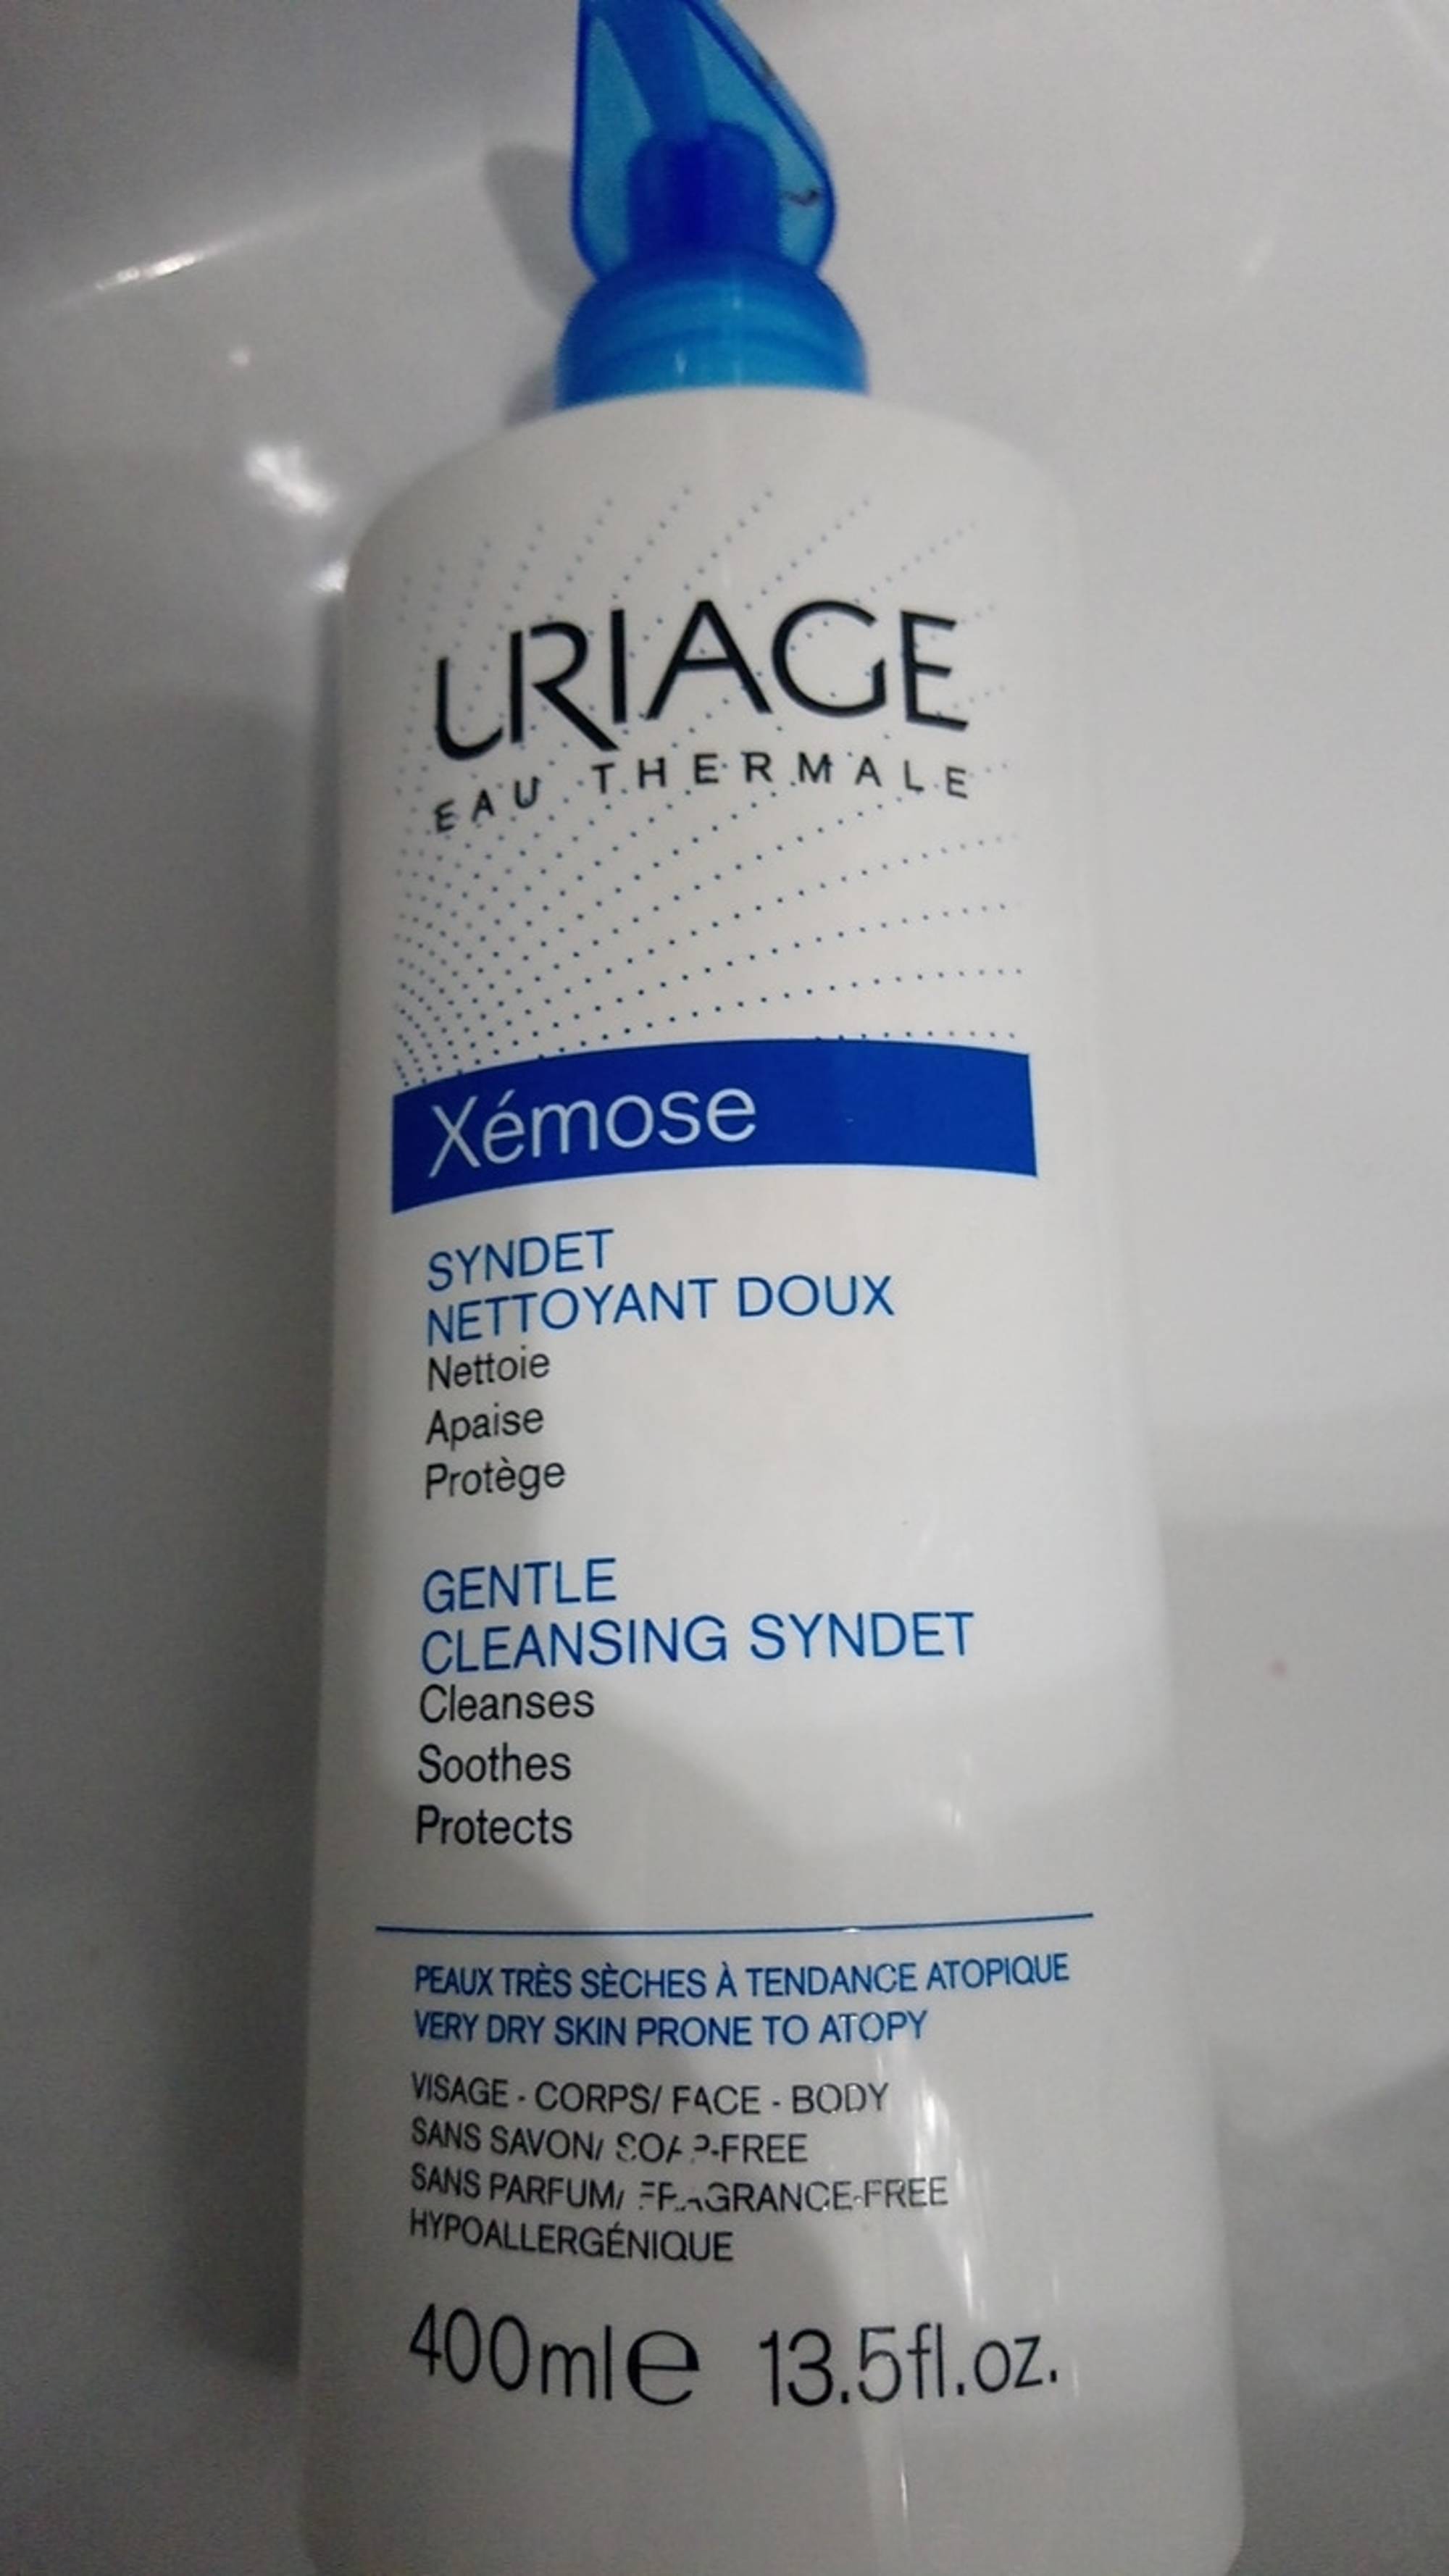 URIAGE - Xémose - Syndet nettoyant doux